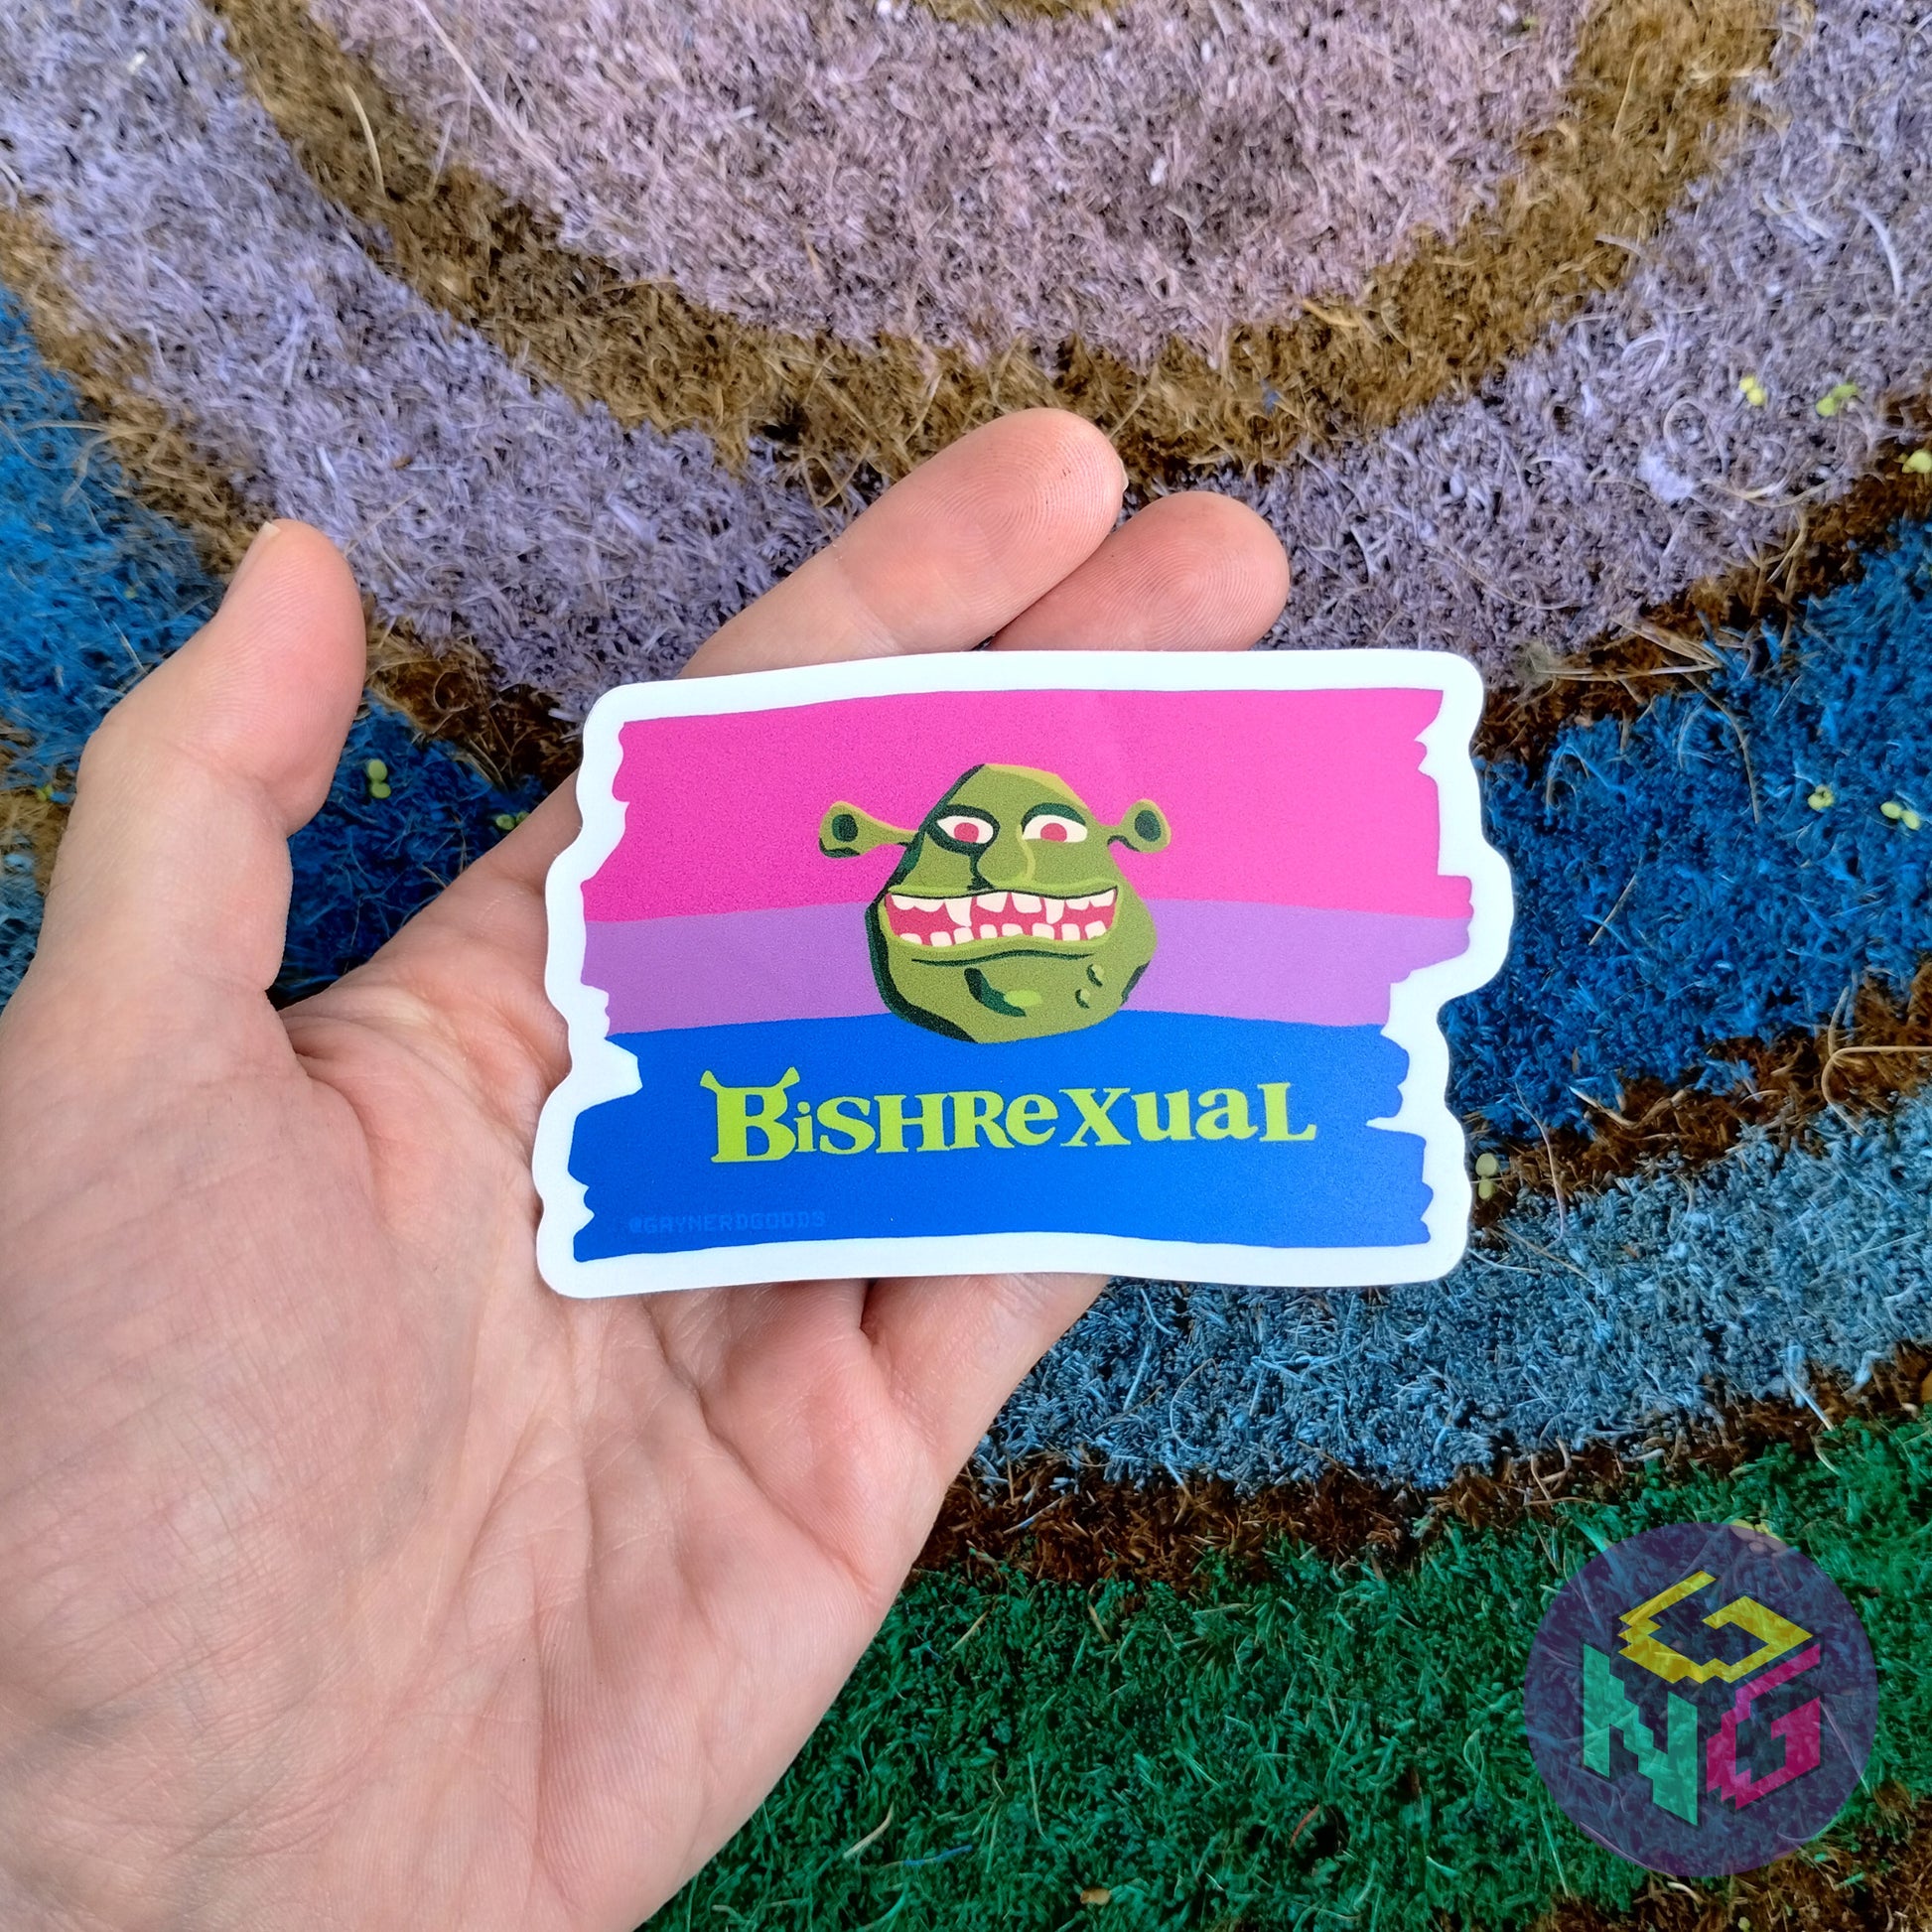 matter bishrexual sticker held in a hand in front of the rainbow welcome mat